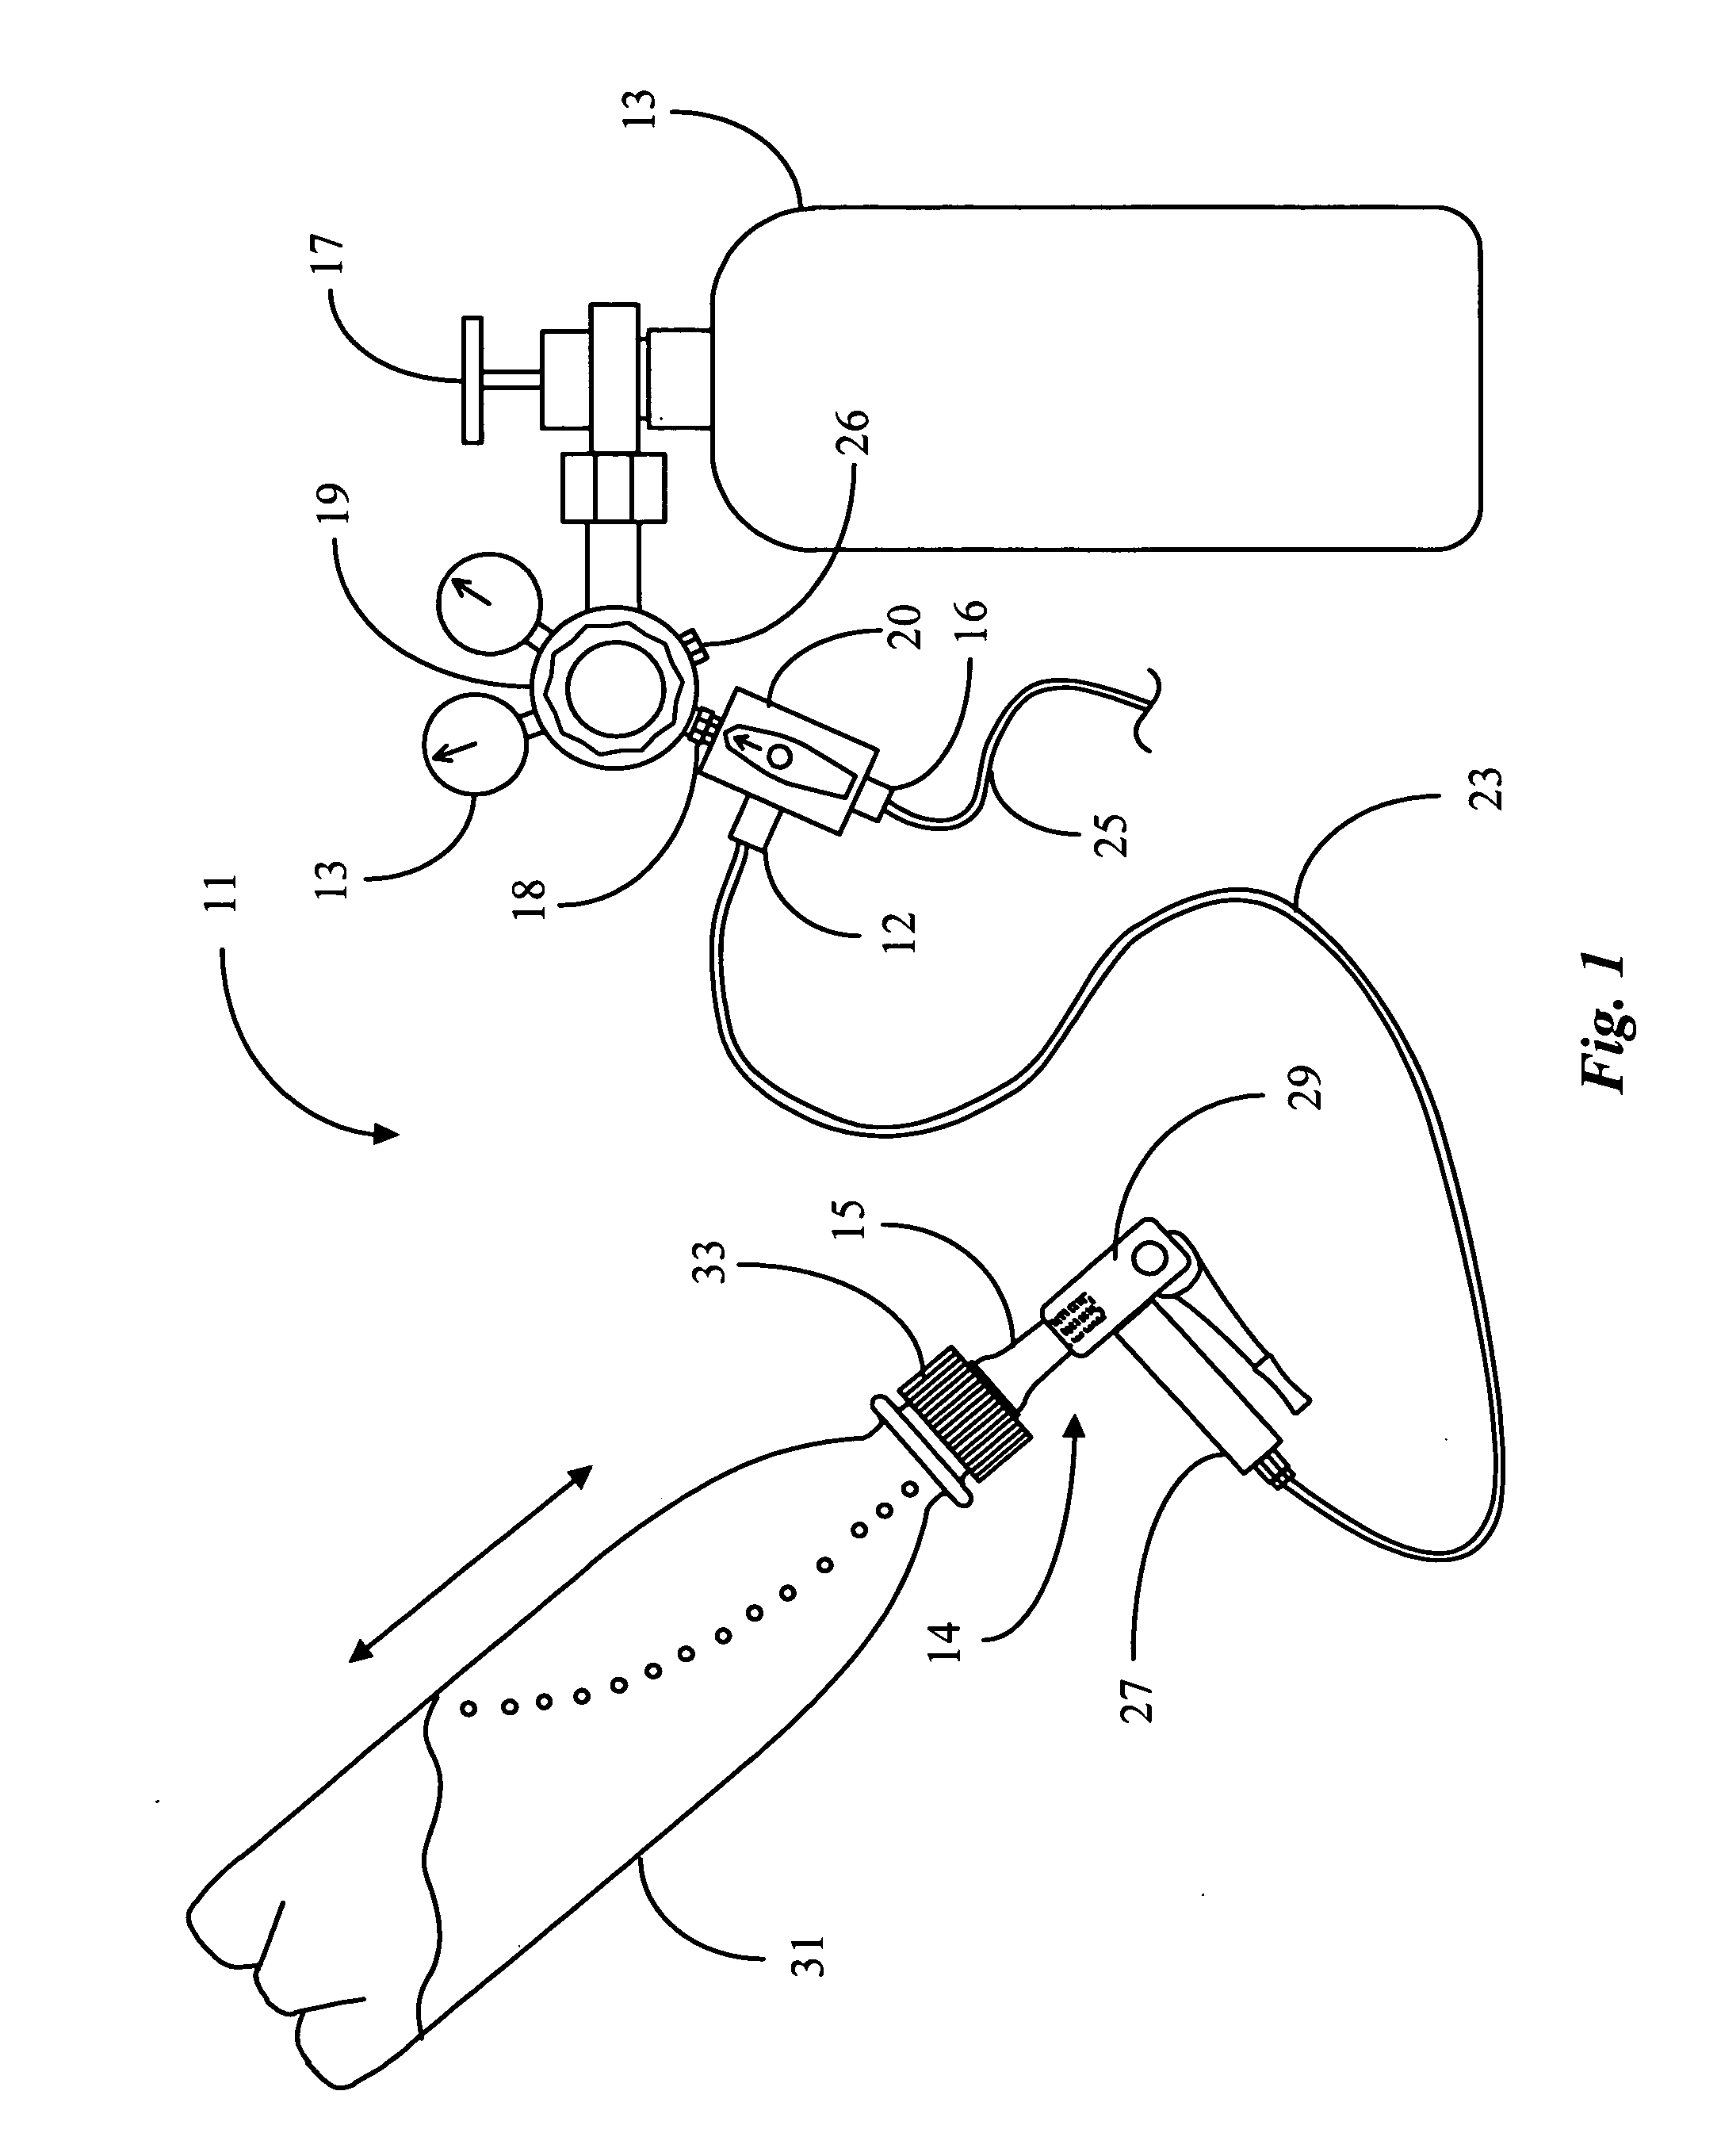 Method and apparatus for preserving beverages and foodstuff